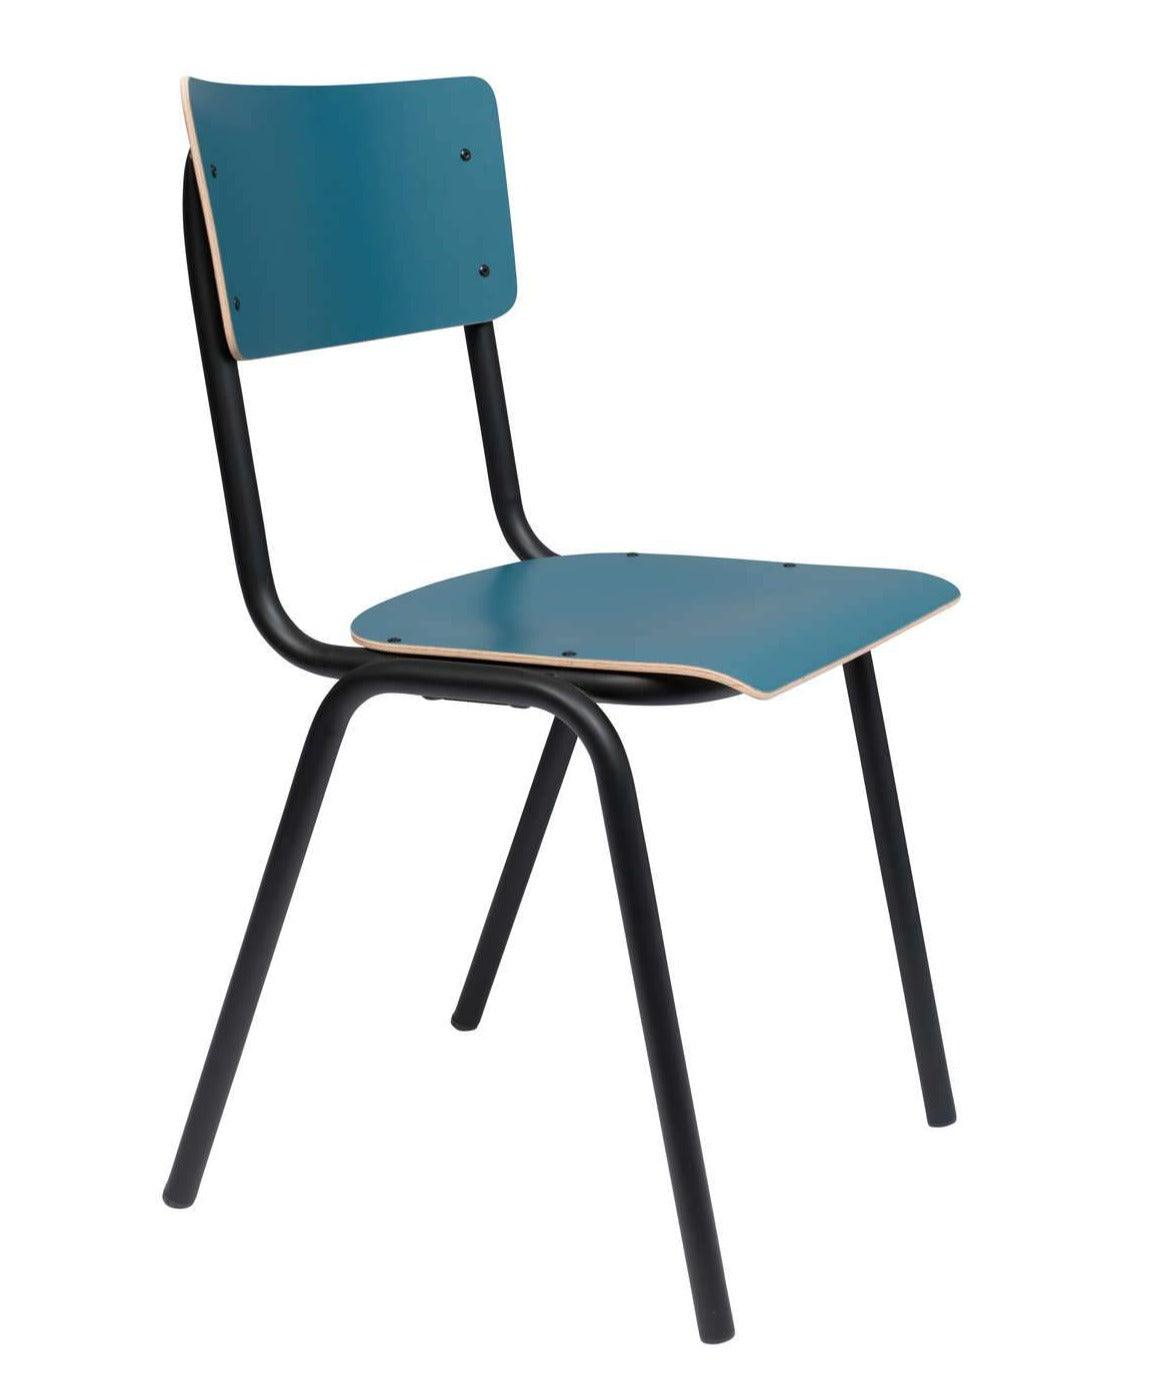 BACK TO SCHOOL chair blue, Zuiver, Eye on Design